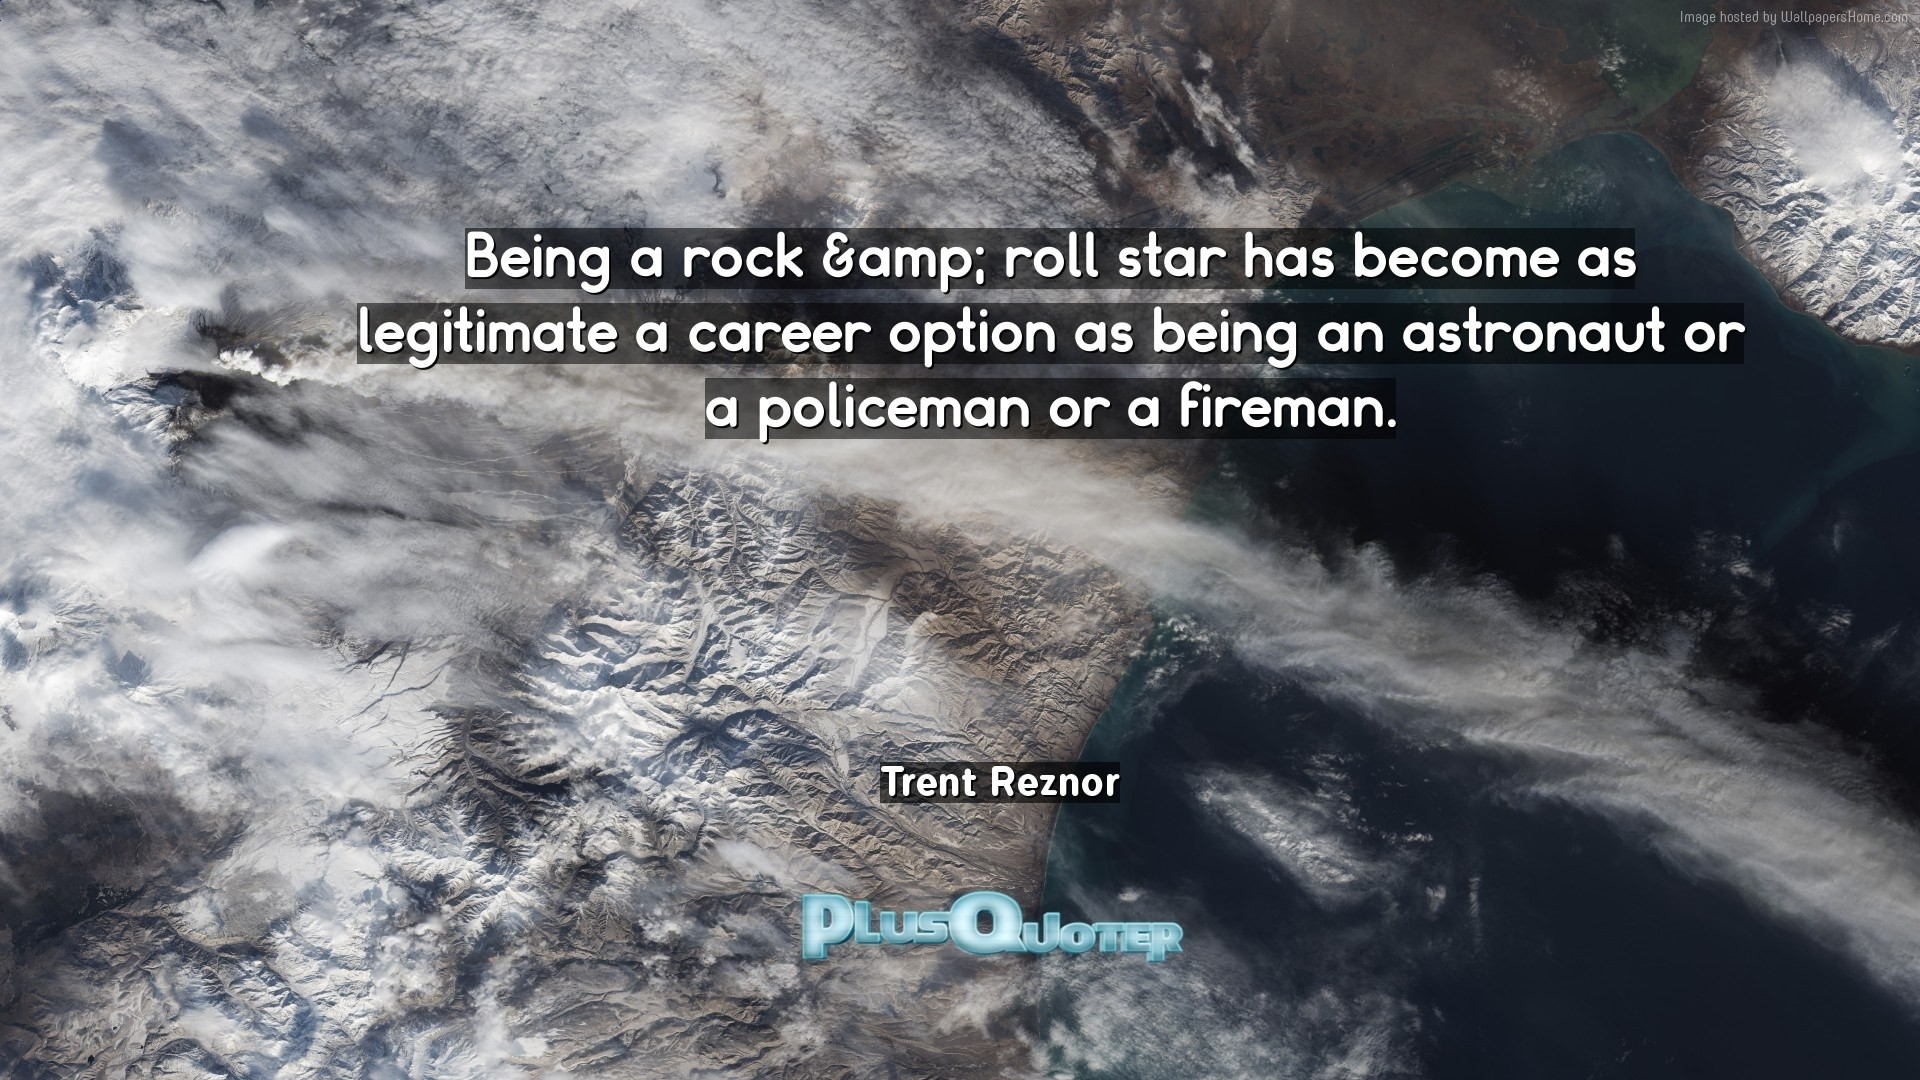 1920x1080 Download Wallpaper with inspirational Quotes- "Being a rock & roll star has  become as